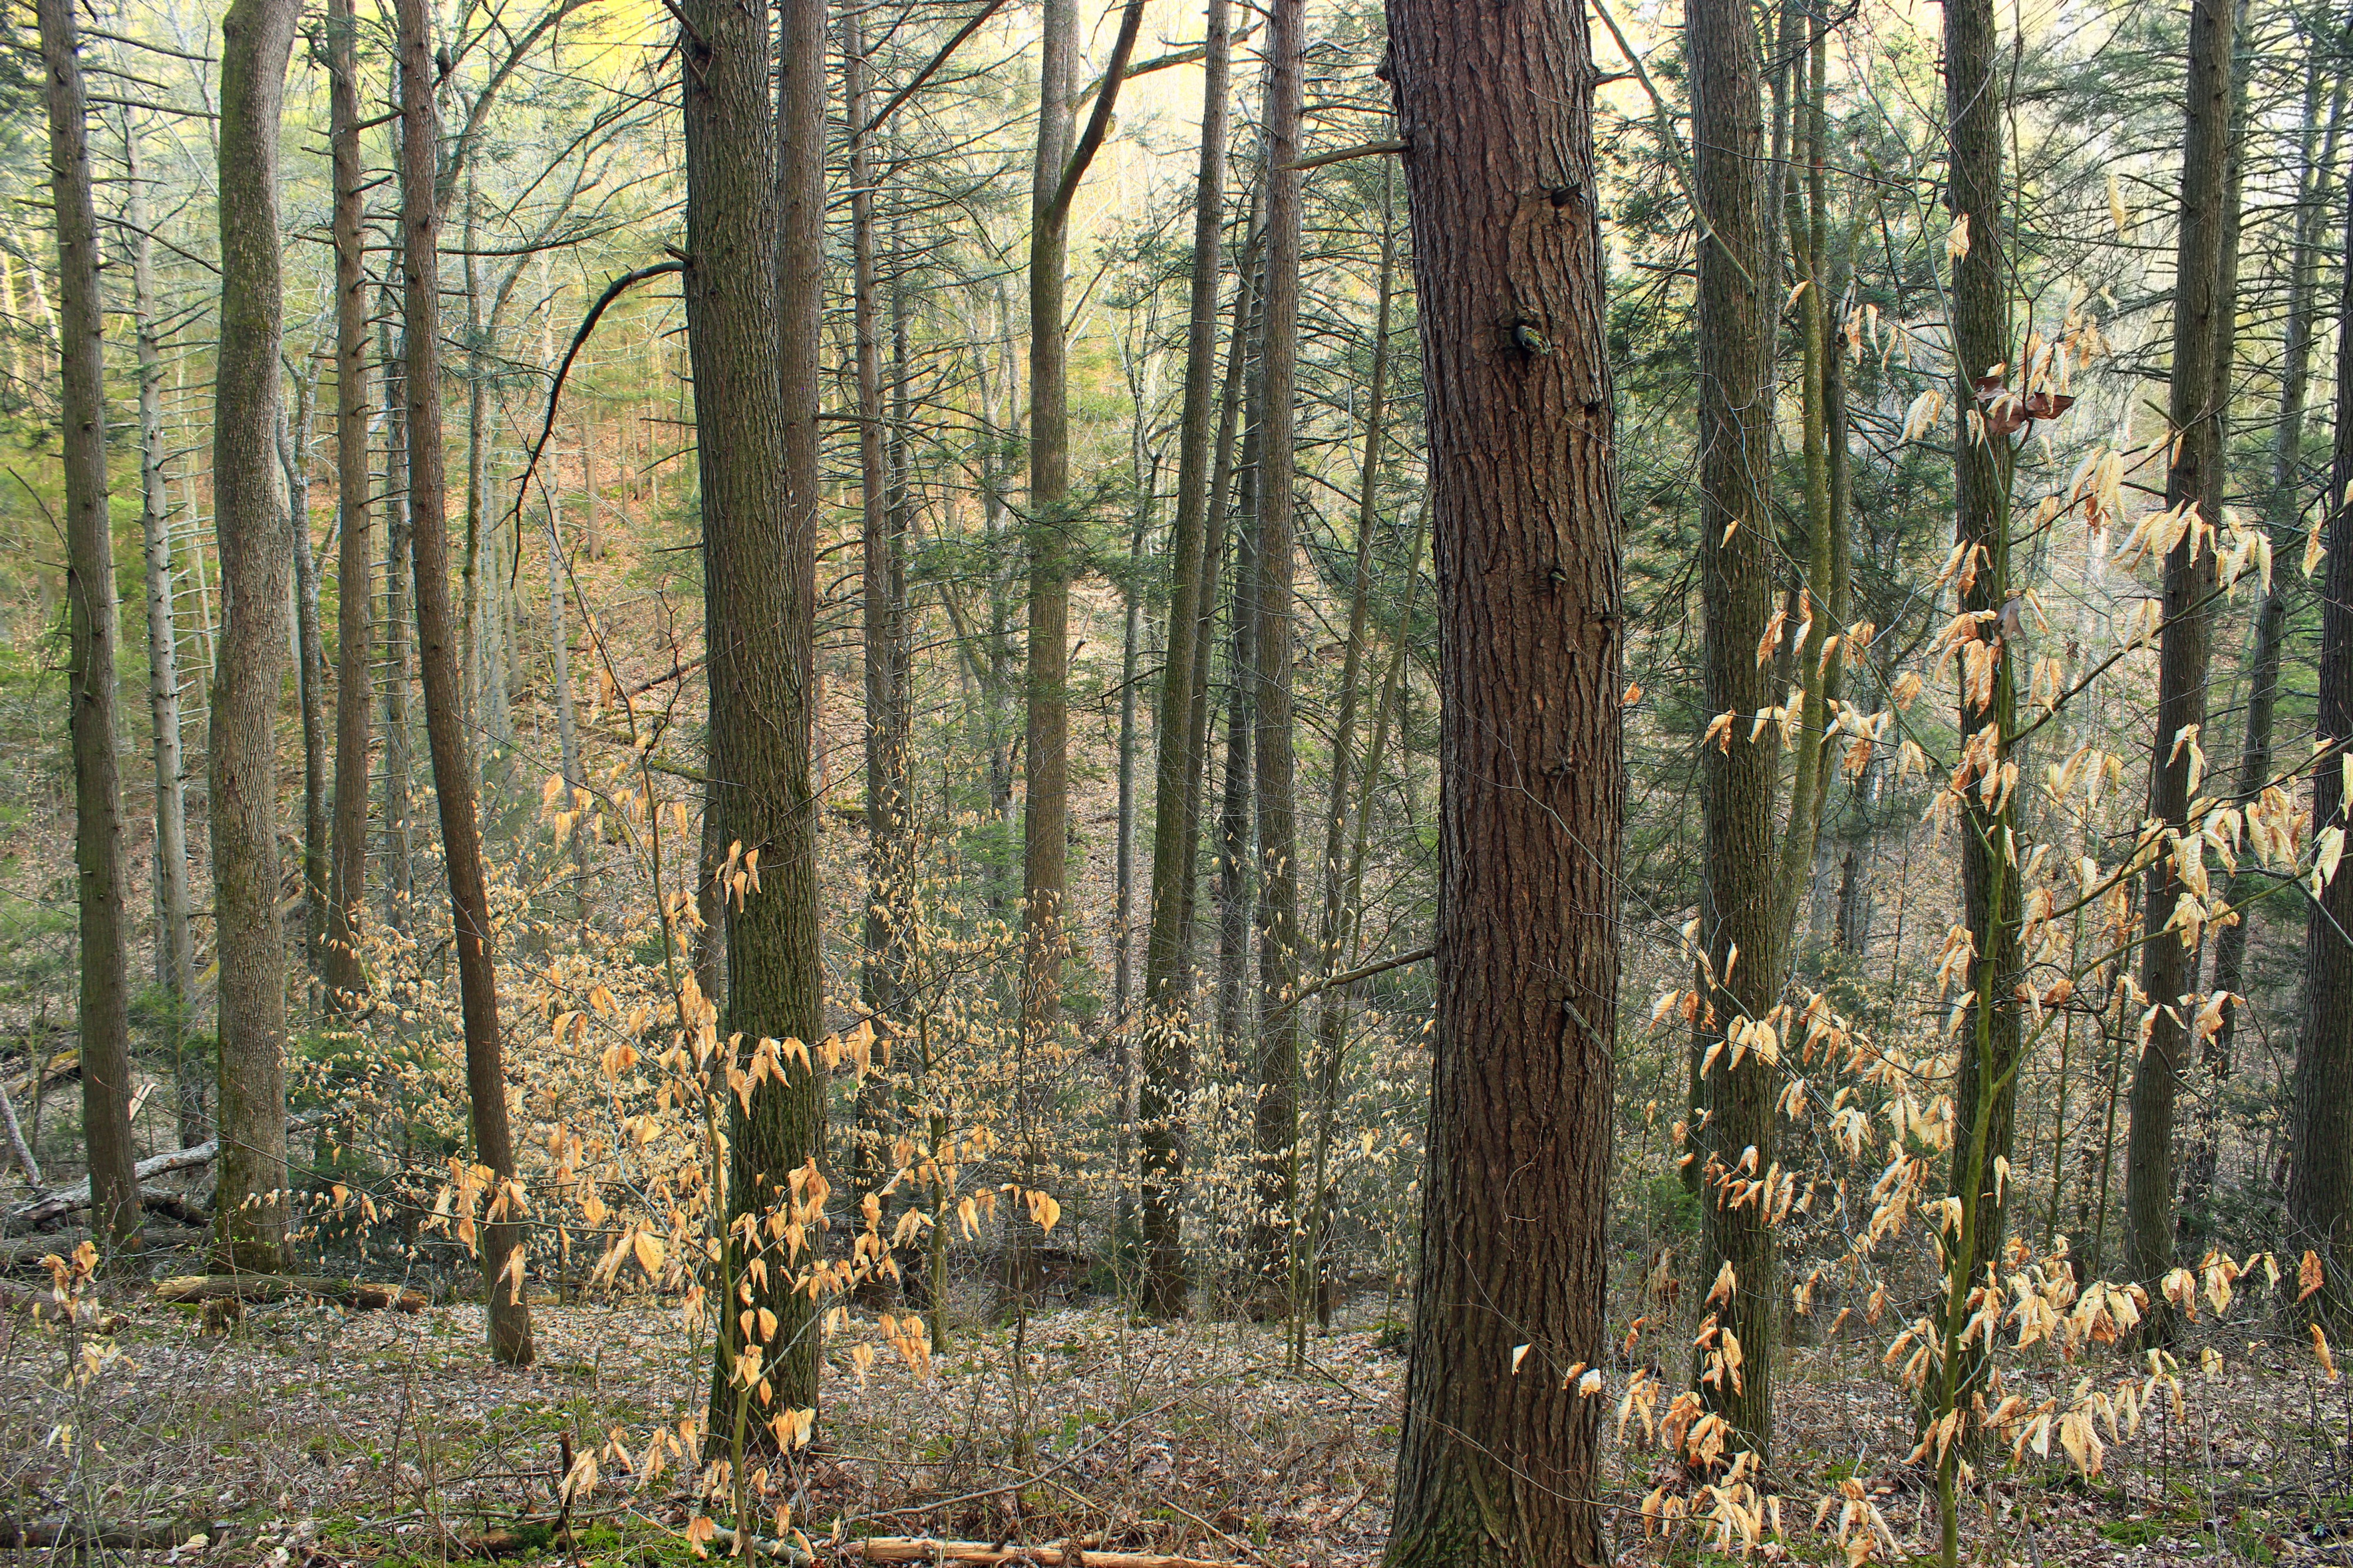 Jakey Hollow Natural Area (Revisit) (8) (17008423660)